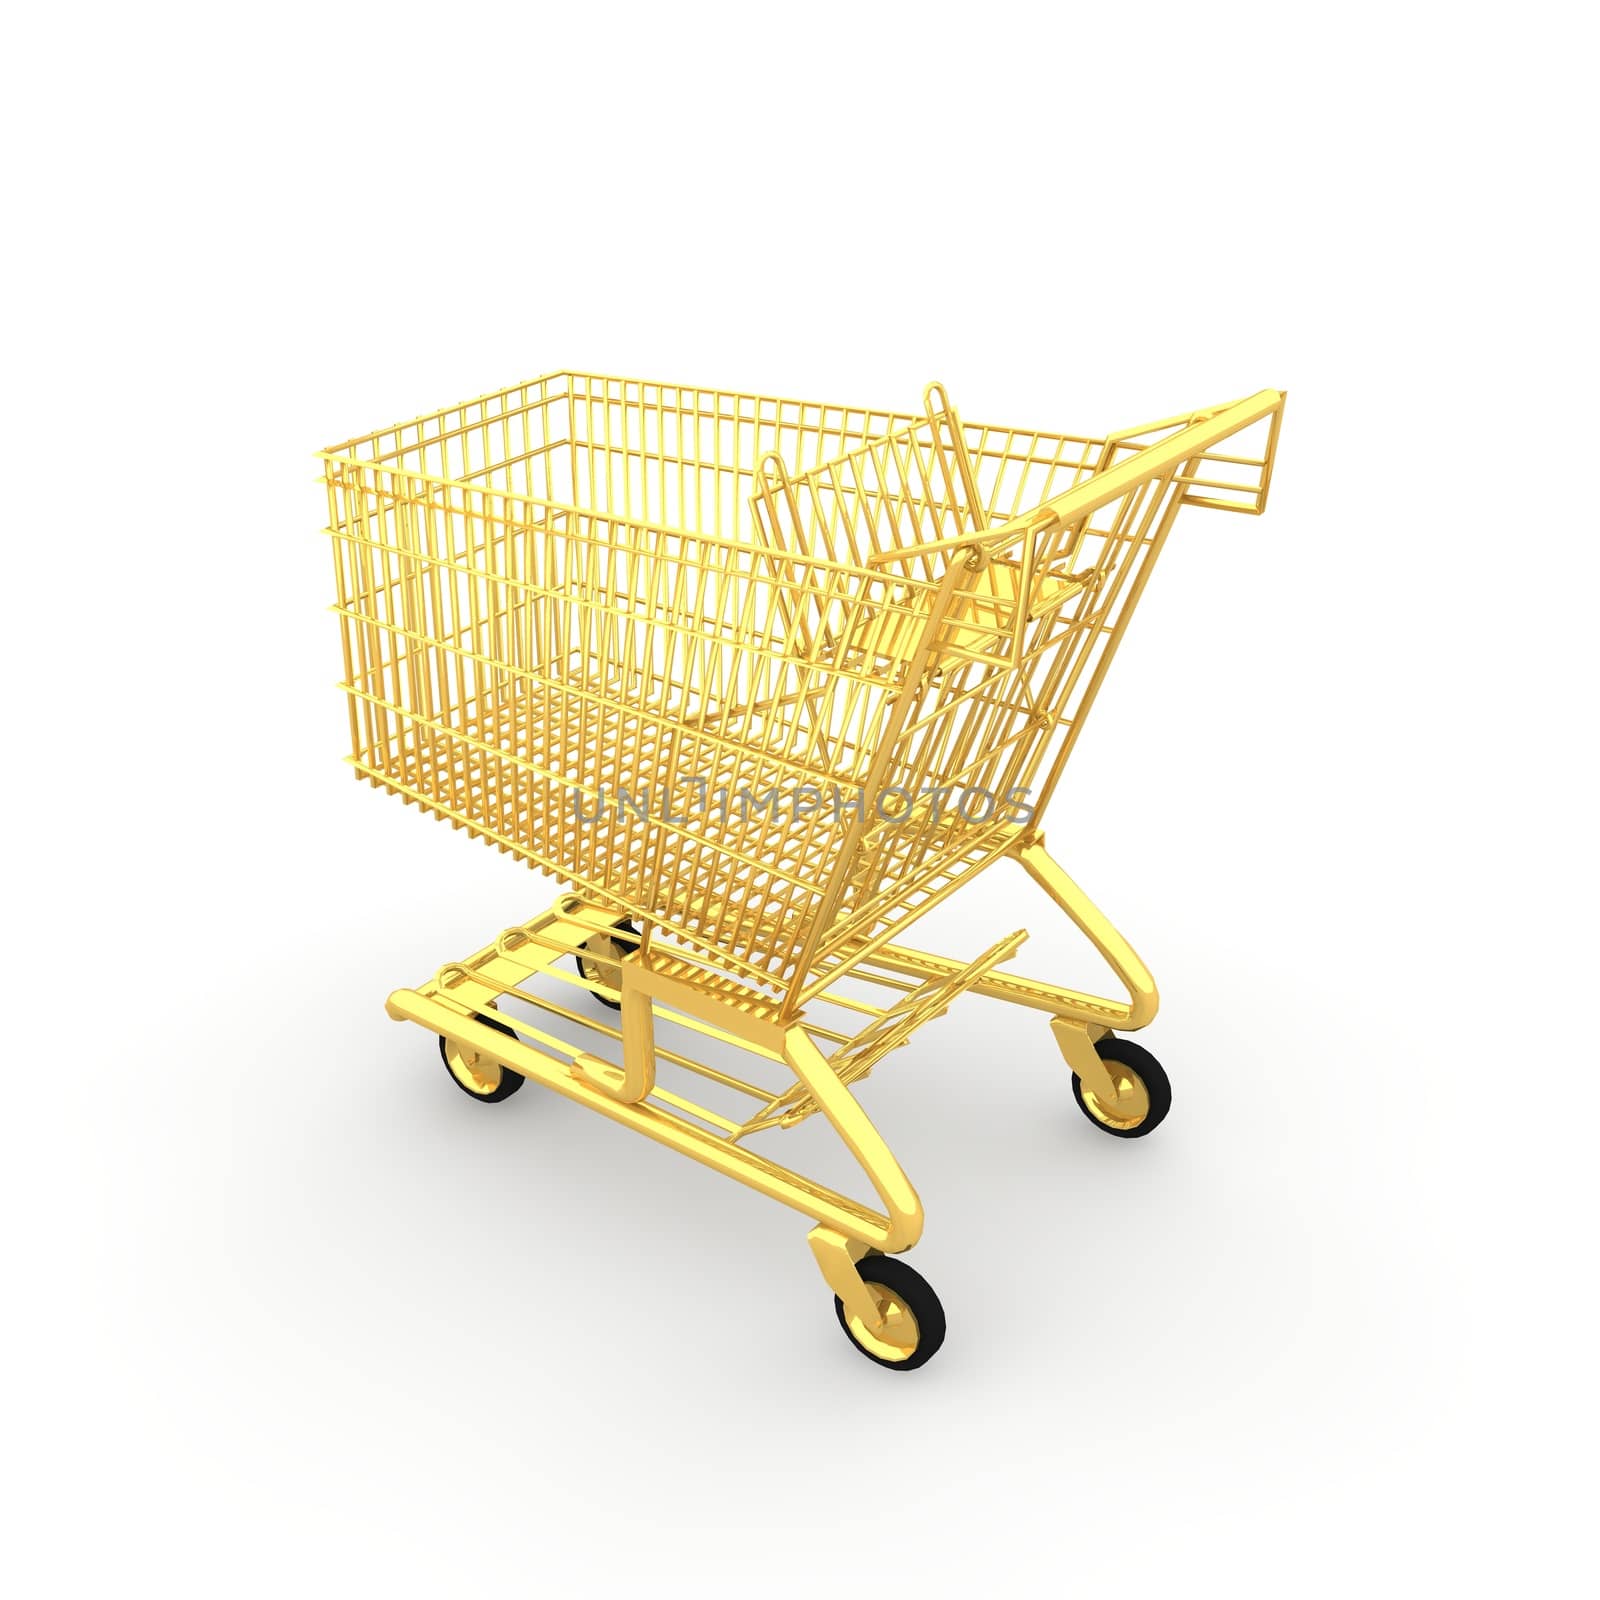 Shopping cart made ������of gold is a wonderful windfall and very luxurious.